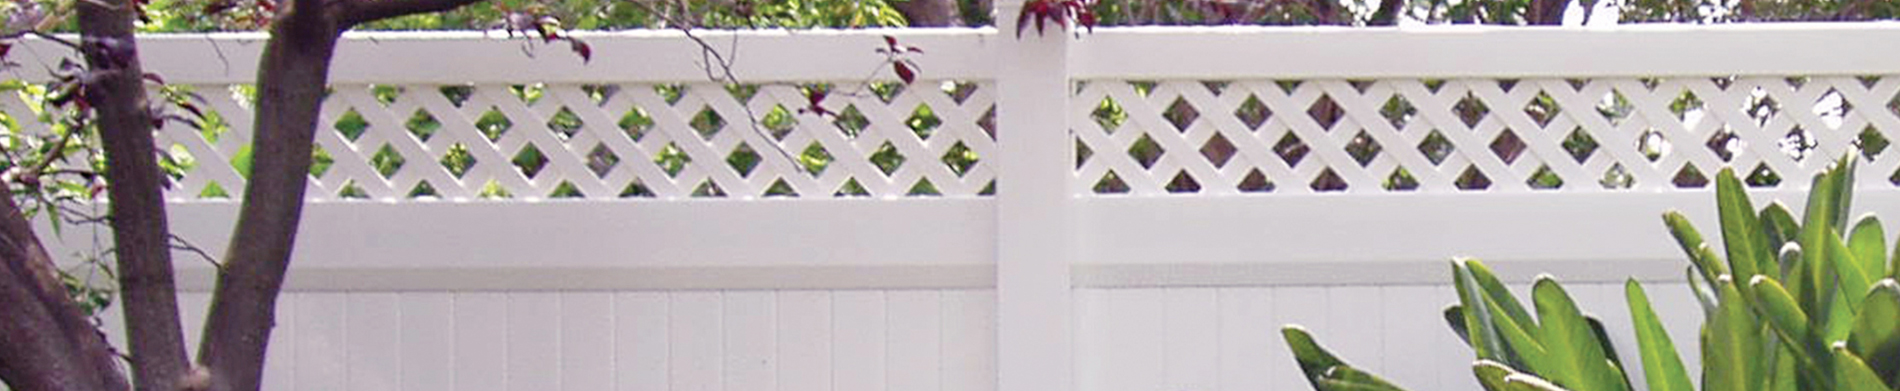 Yuan installed a white vinyl fence from Duramax around his property